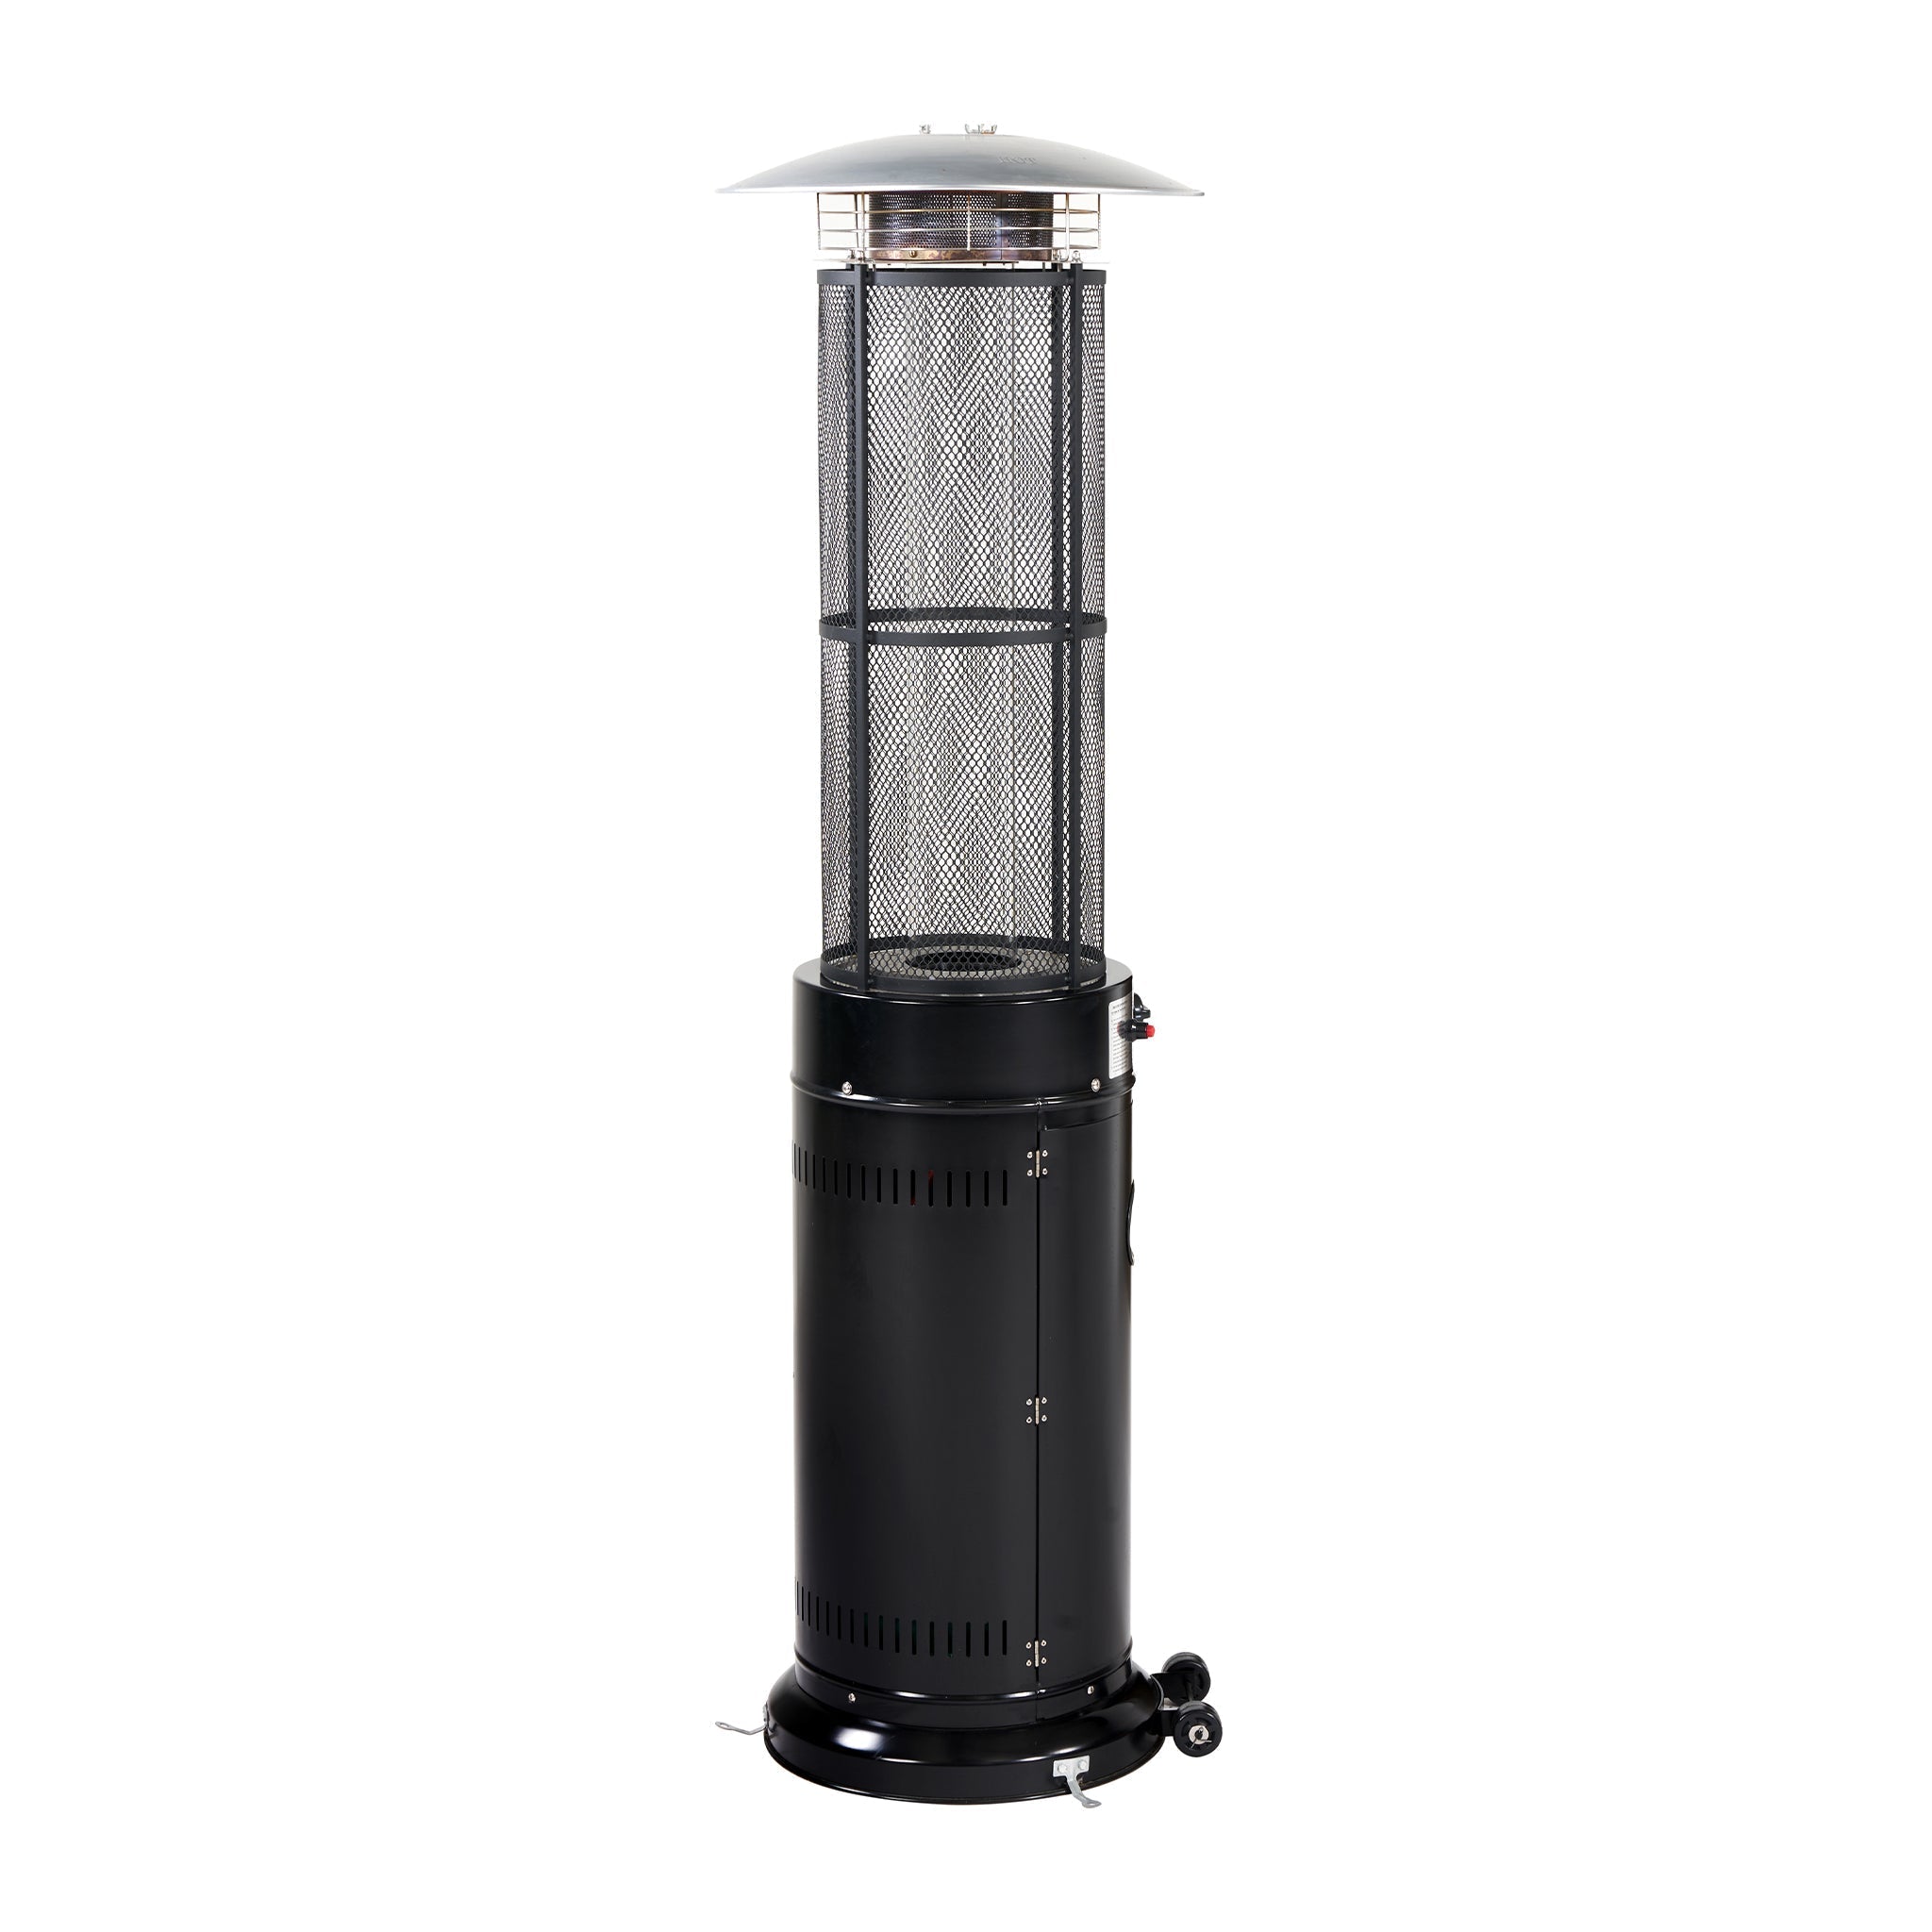 Cylinder Patio Heater in Black